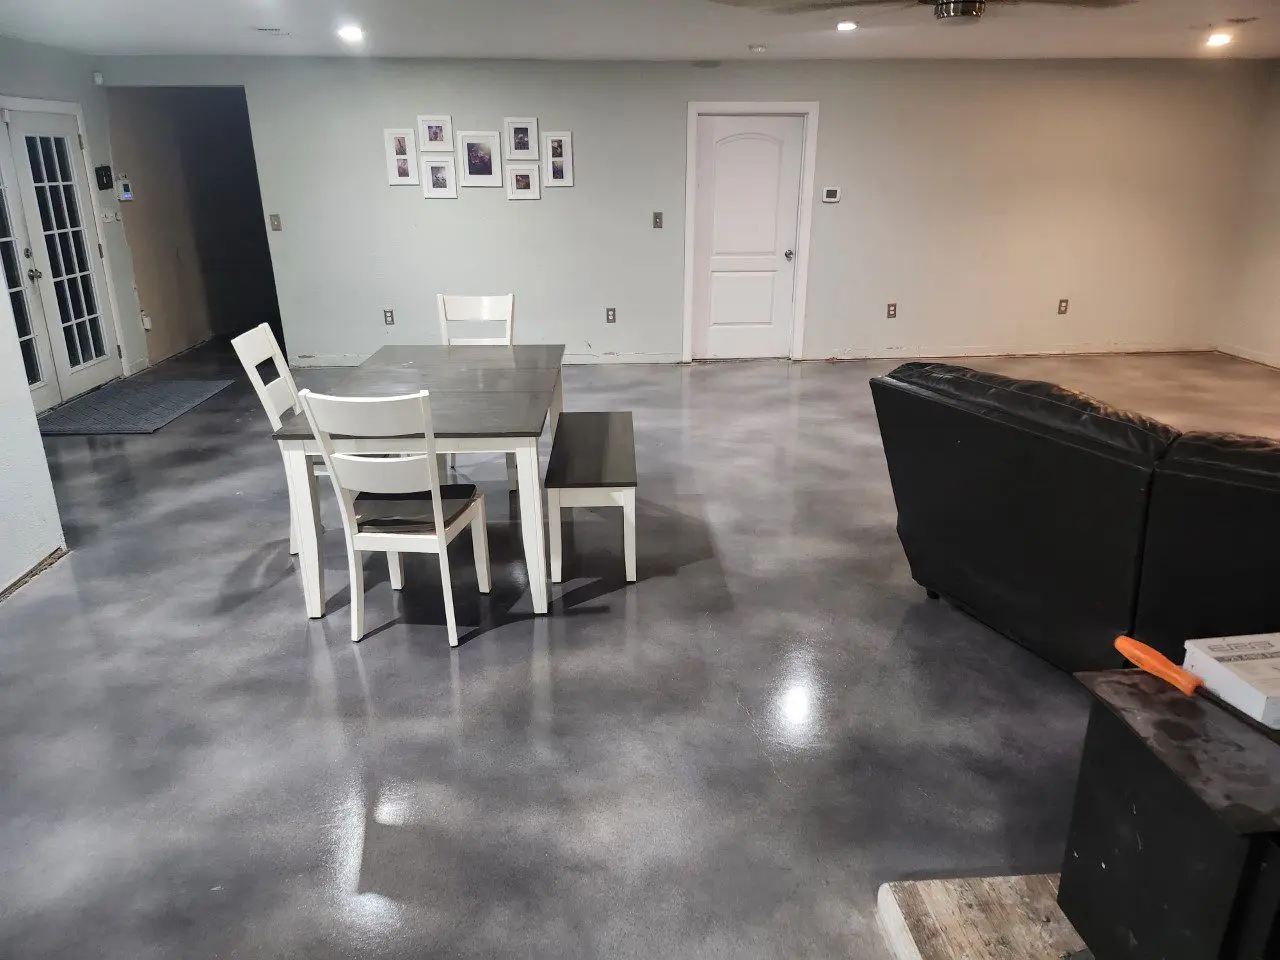 After ProWax Polish - A shiny, fully furnished room showcasing the final result of the concrete floor transformation, reflecting the light beautifully